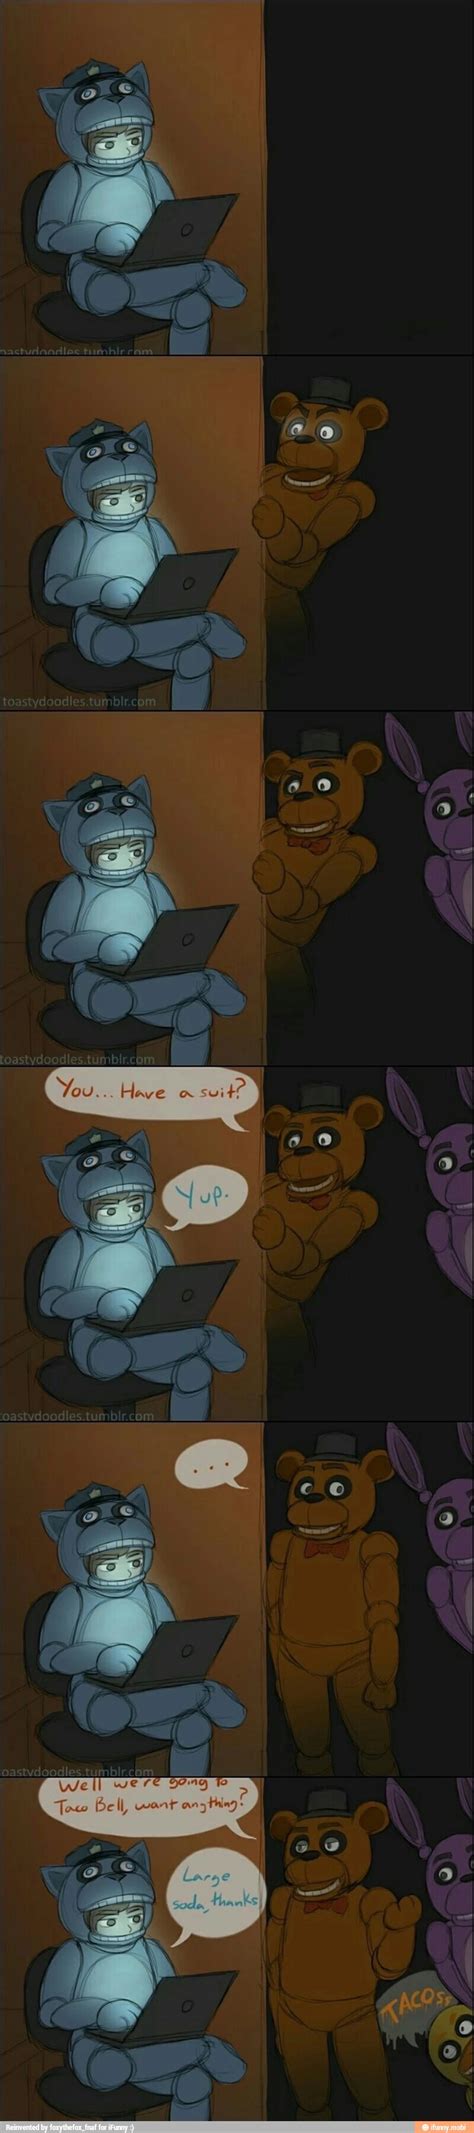 Lol Five Nights At Freddy S The Awkward Yeti Funny Memes Hilarious